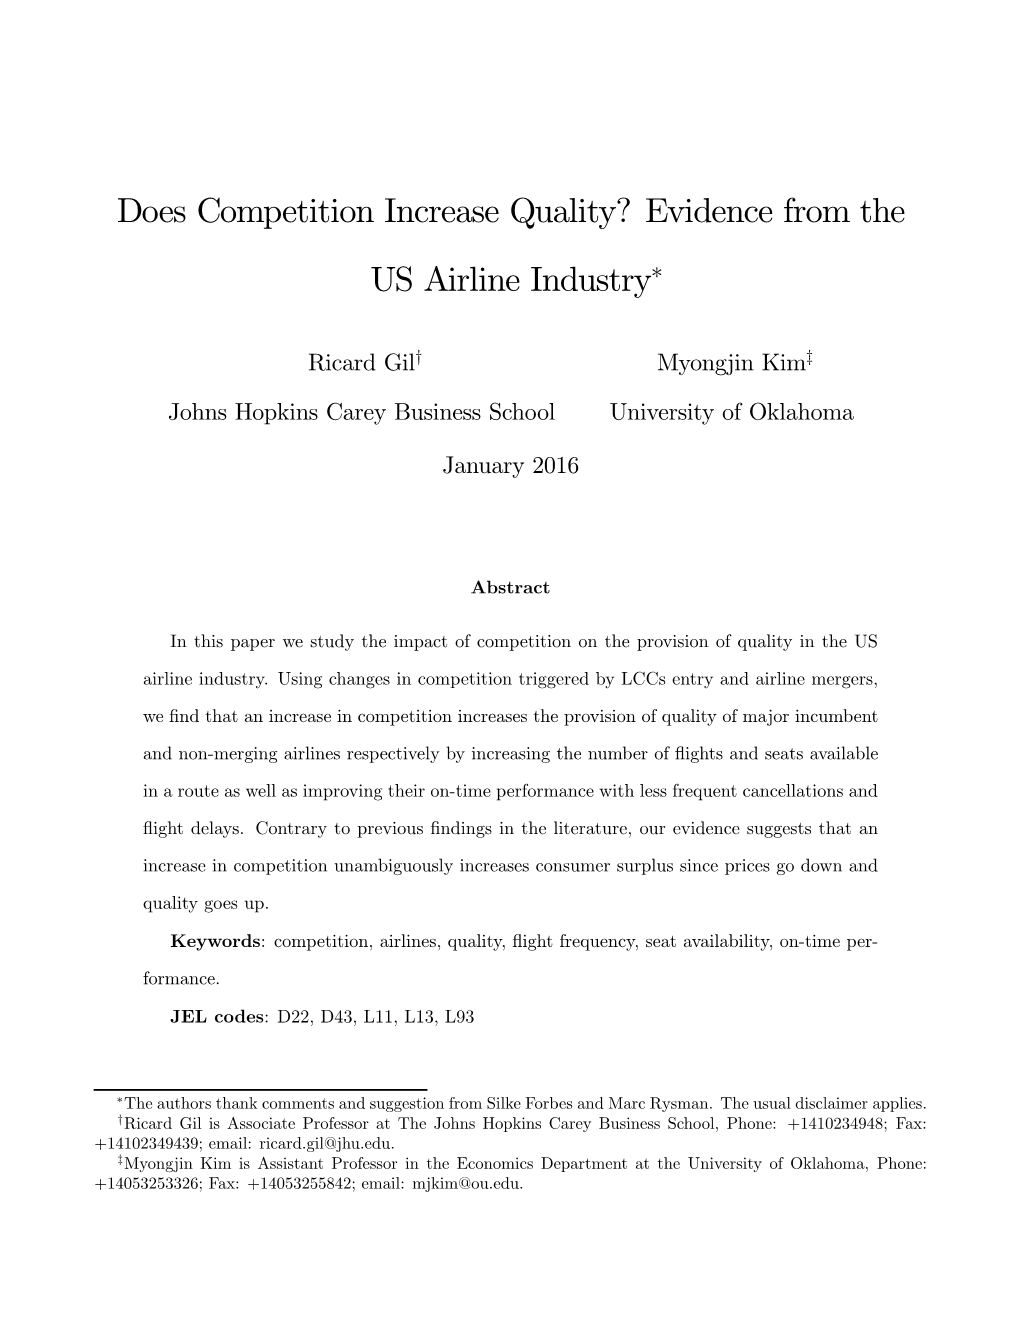 Does Competition Increase Quality? Evidence from the US Airline Industry